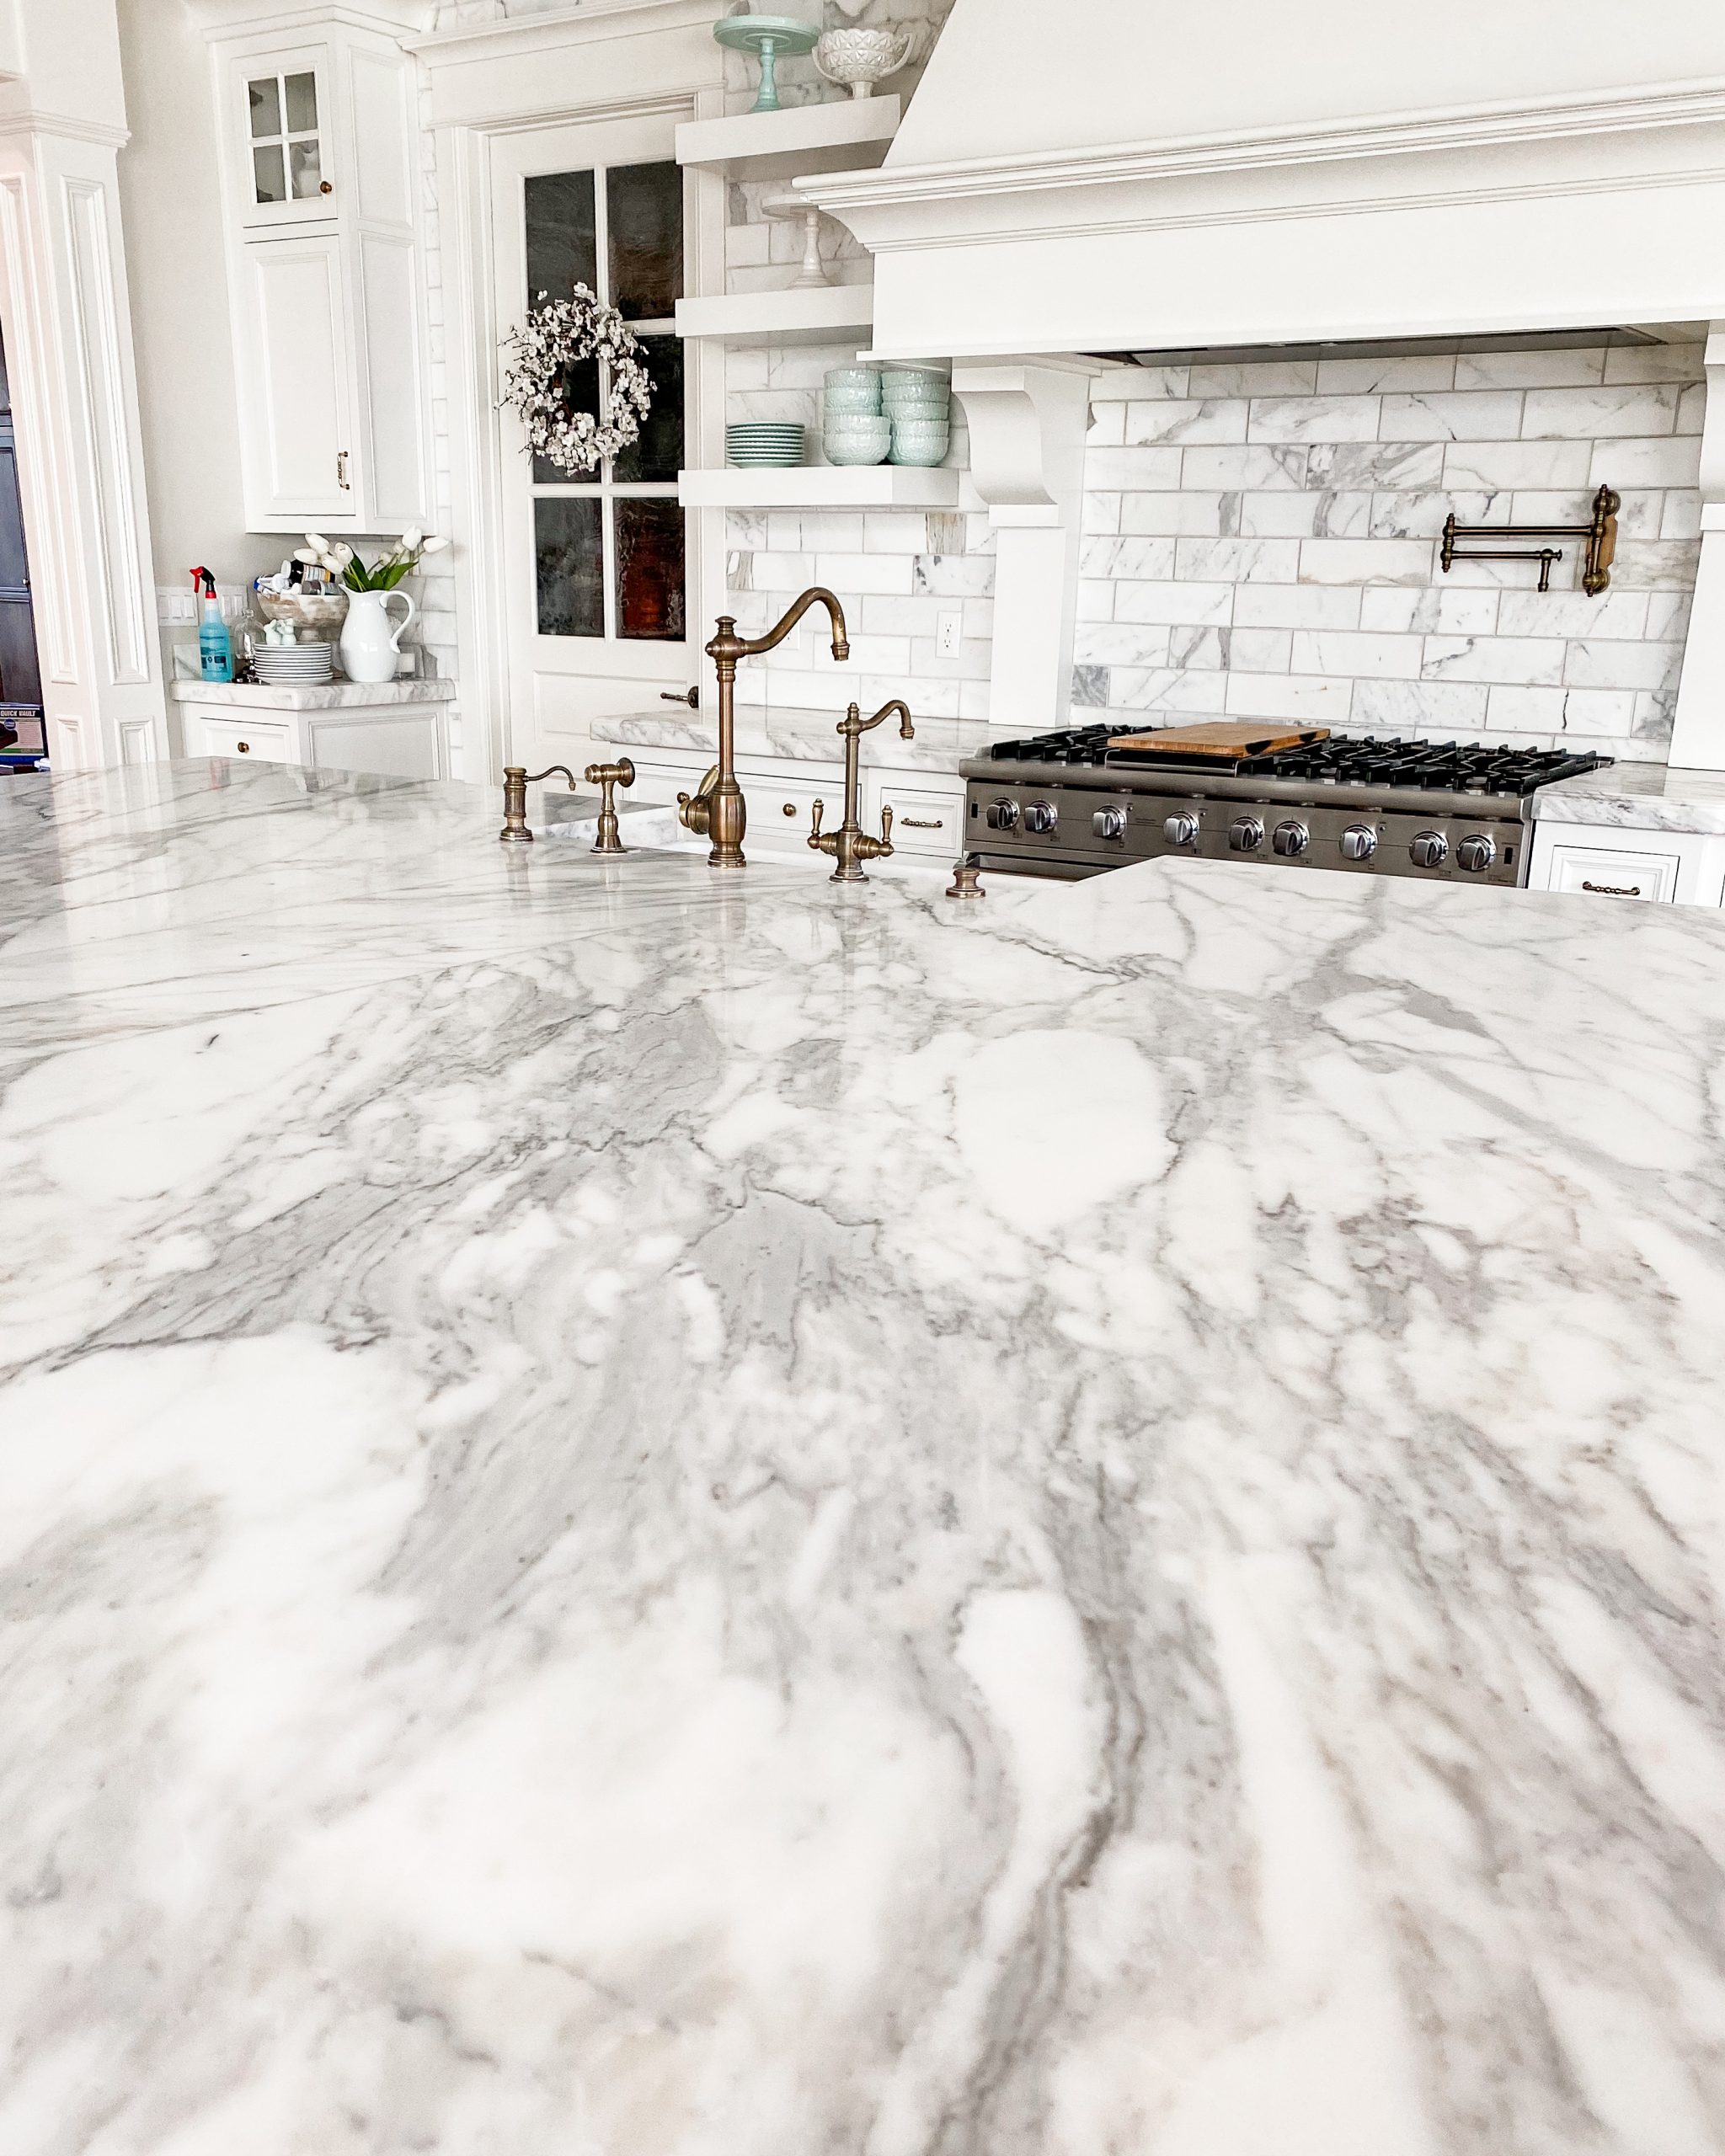 tuffskin application to marble countertops